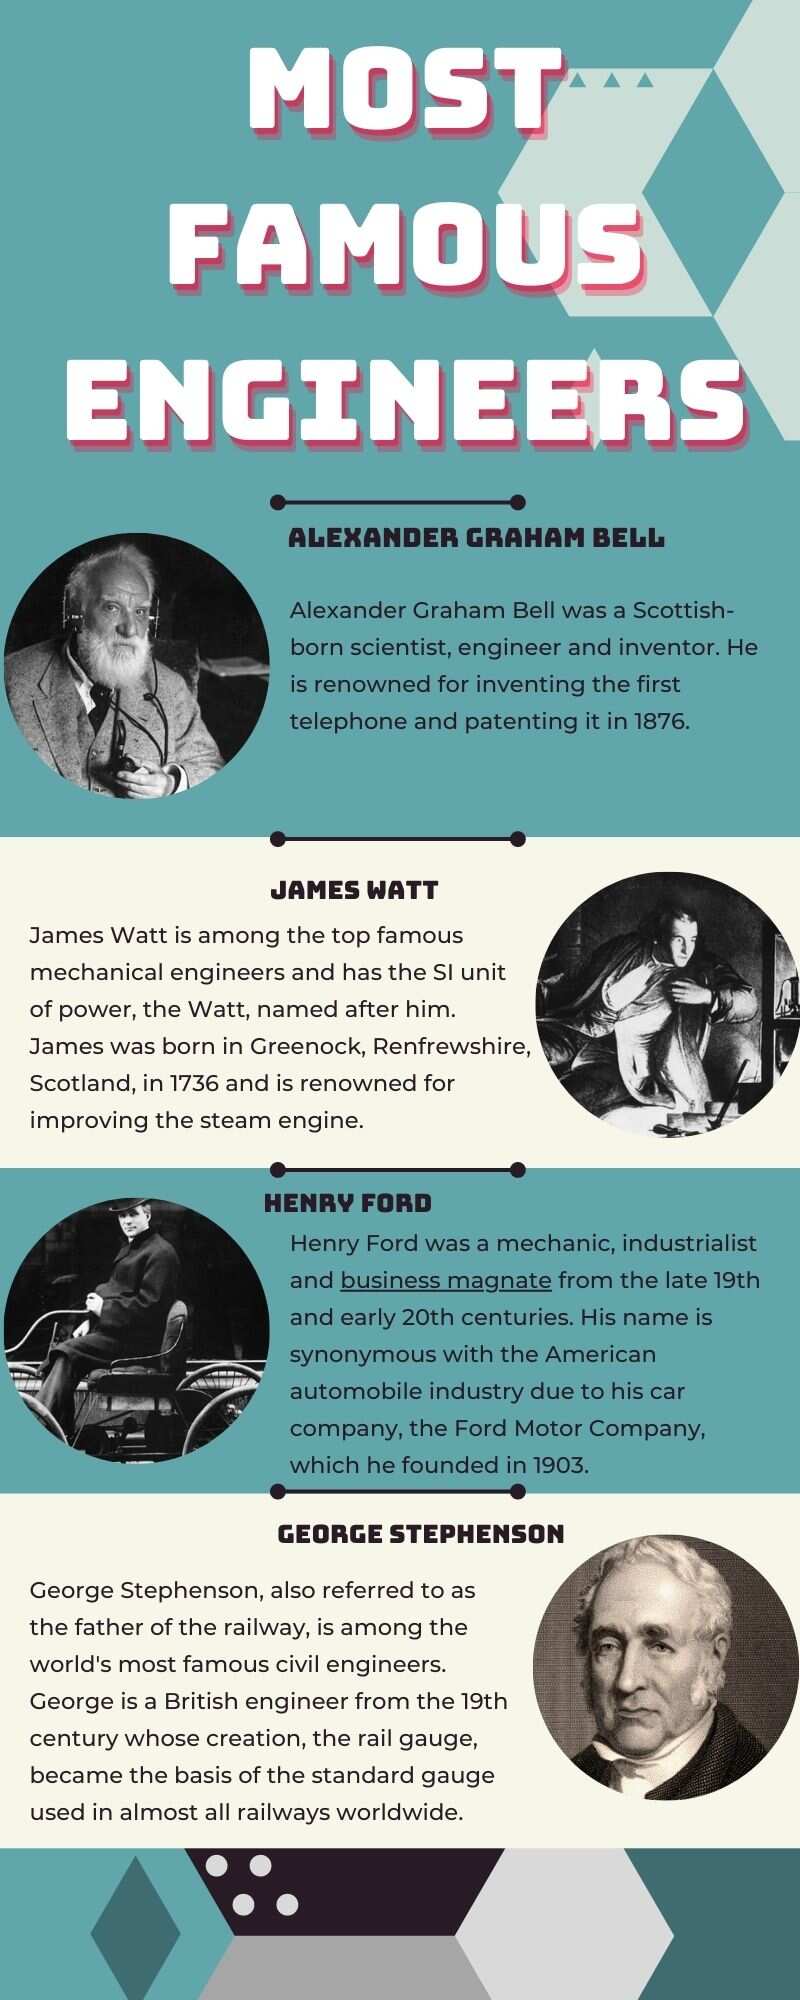 Most famous engineers